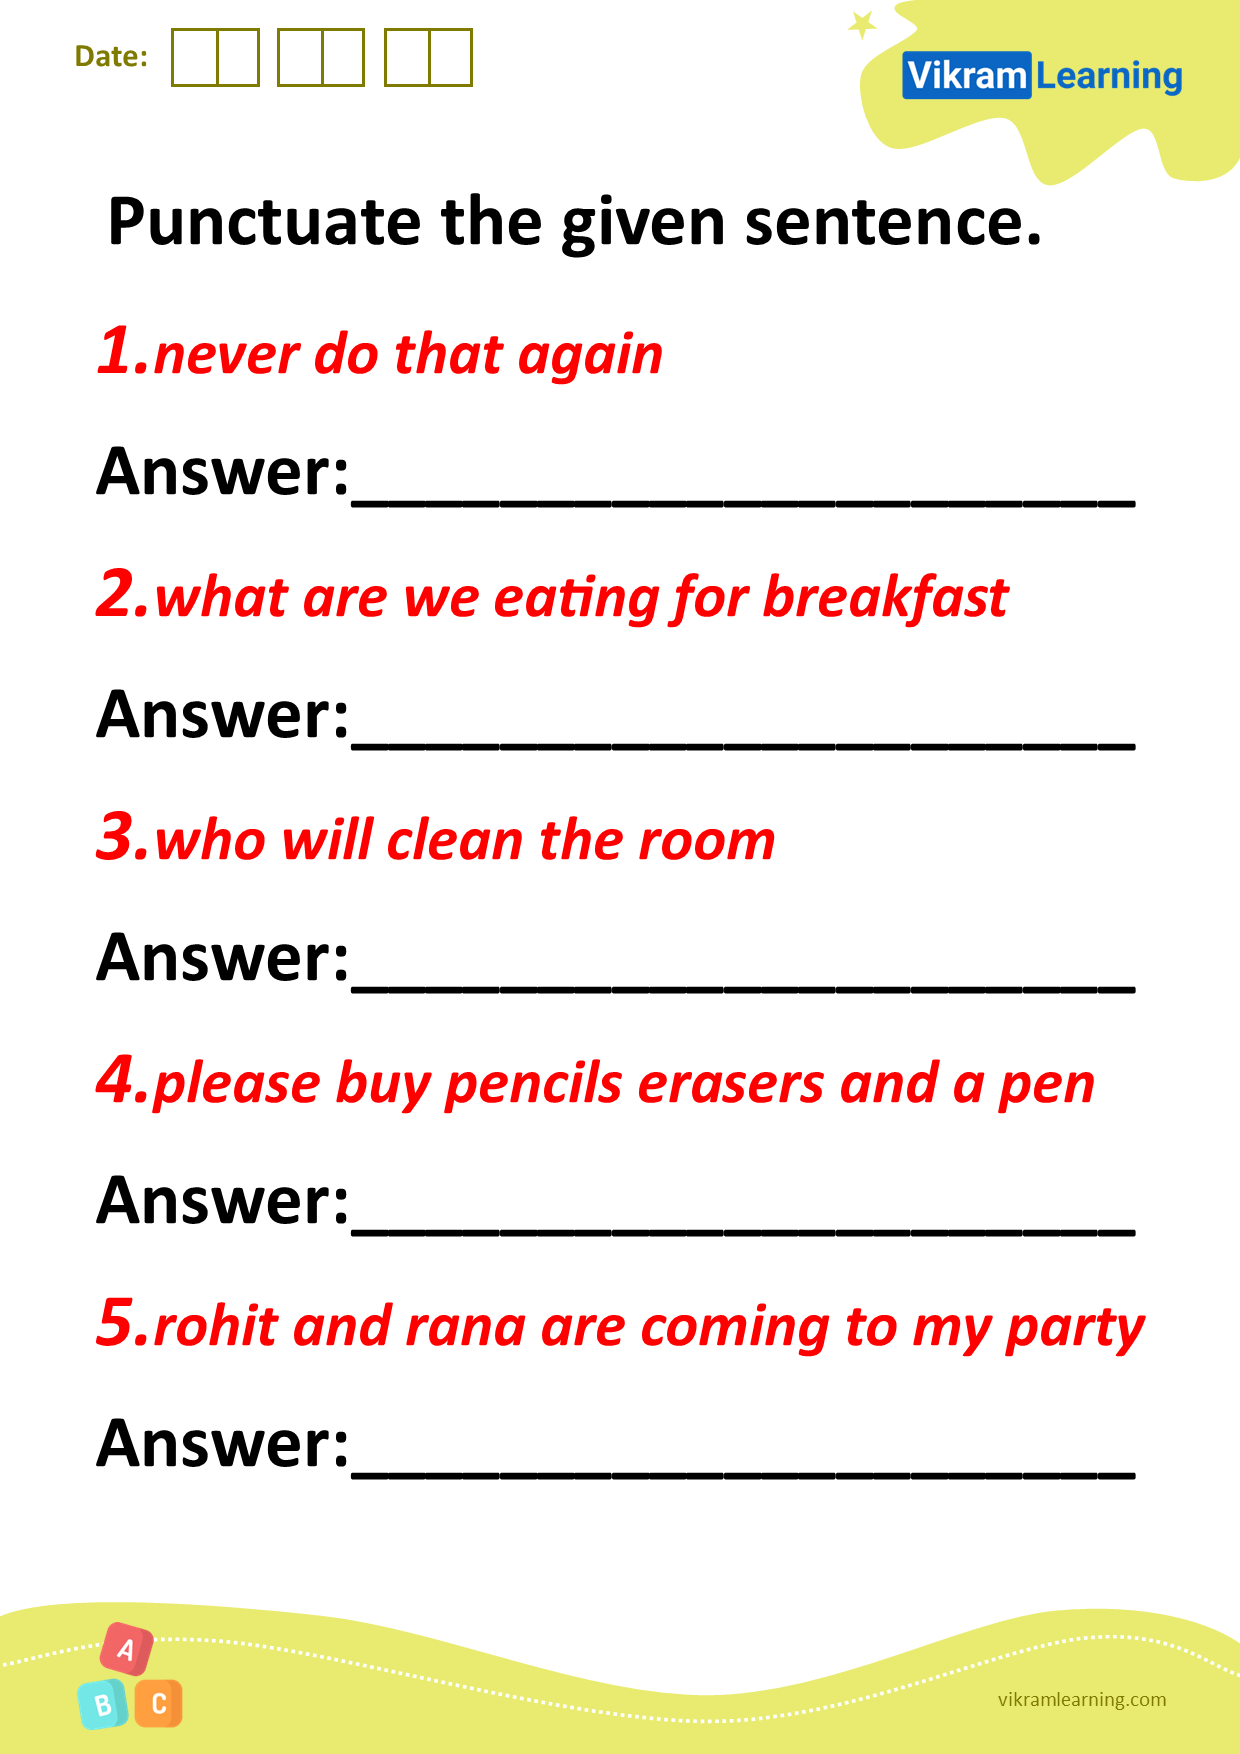 download-punctuate-the-given-sentence-worksheets-vikramlearning